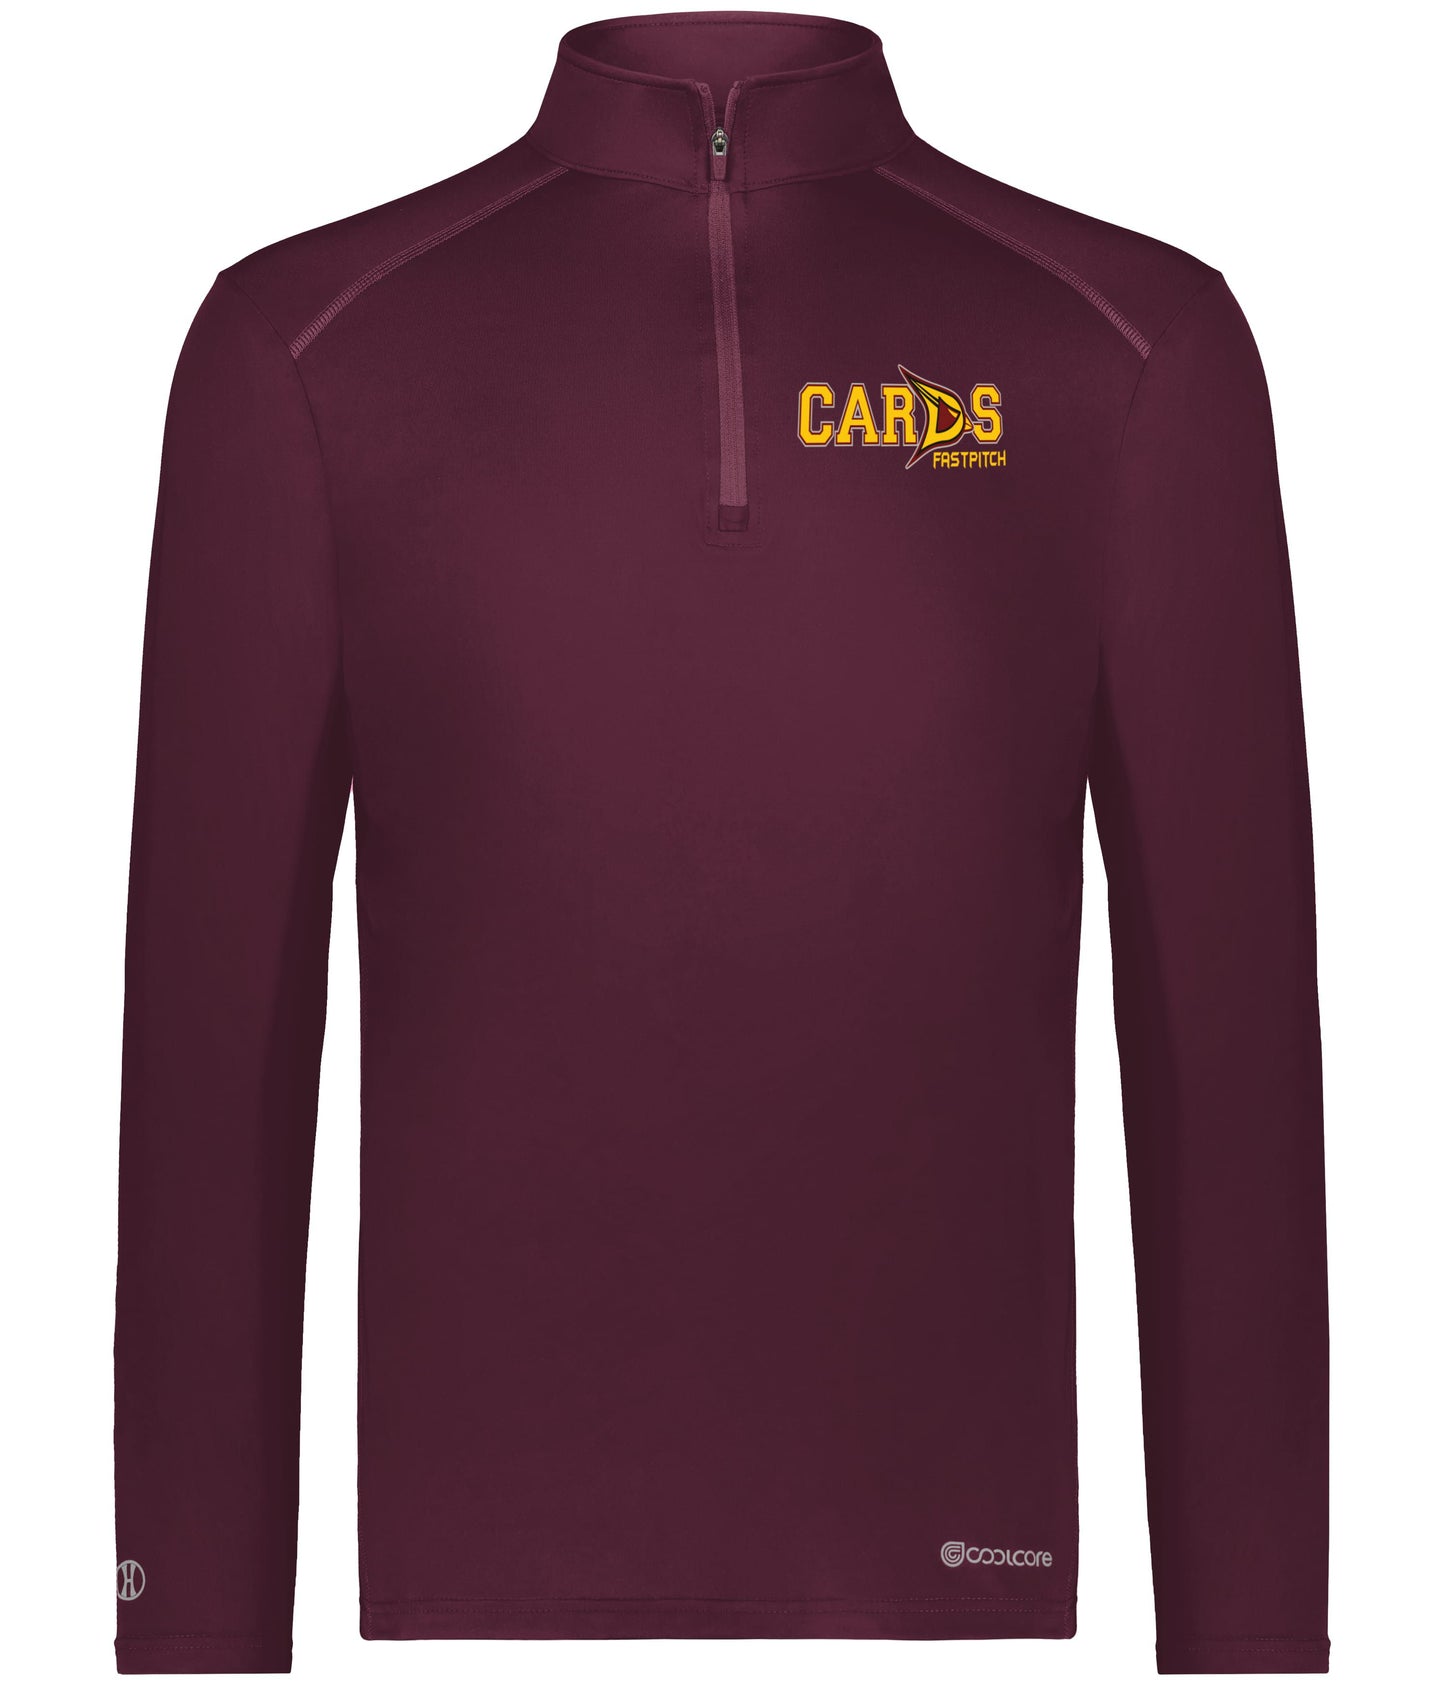 Cards Fastpitch Cool Core 1/4 Zip Pullover